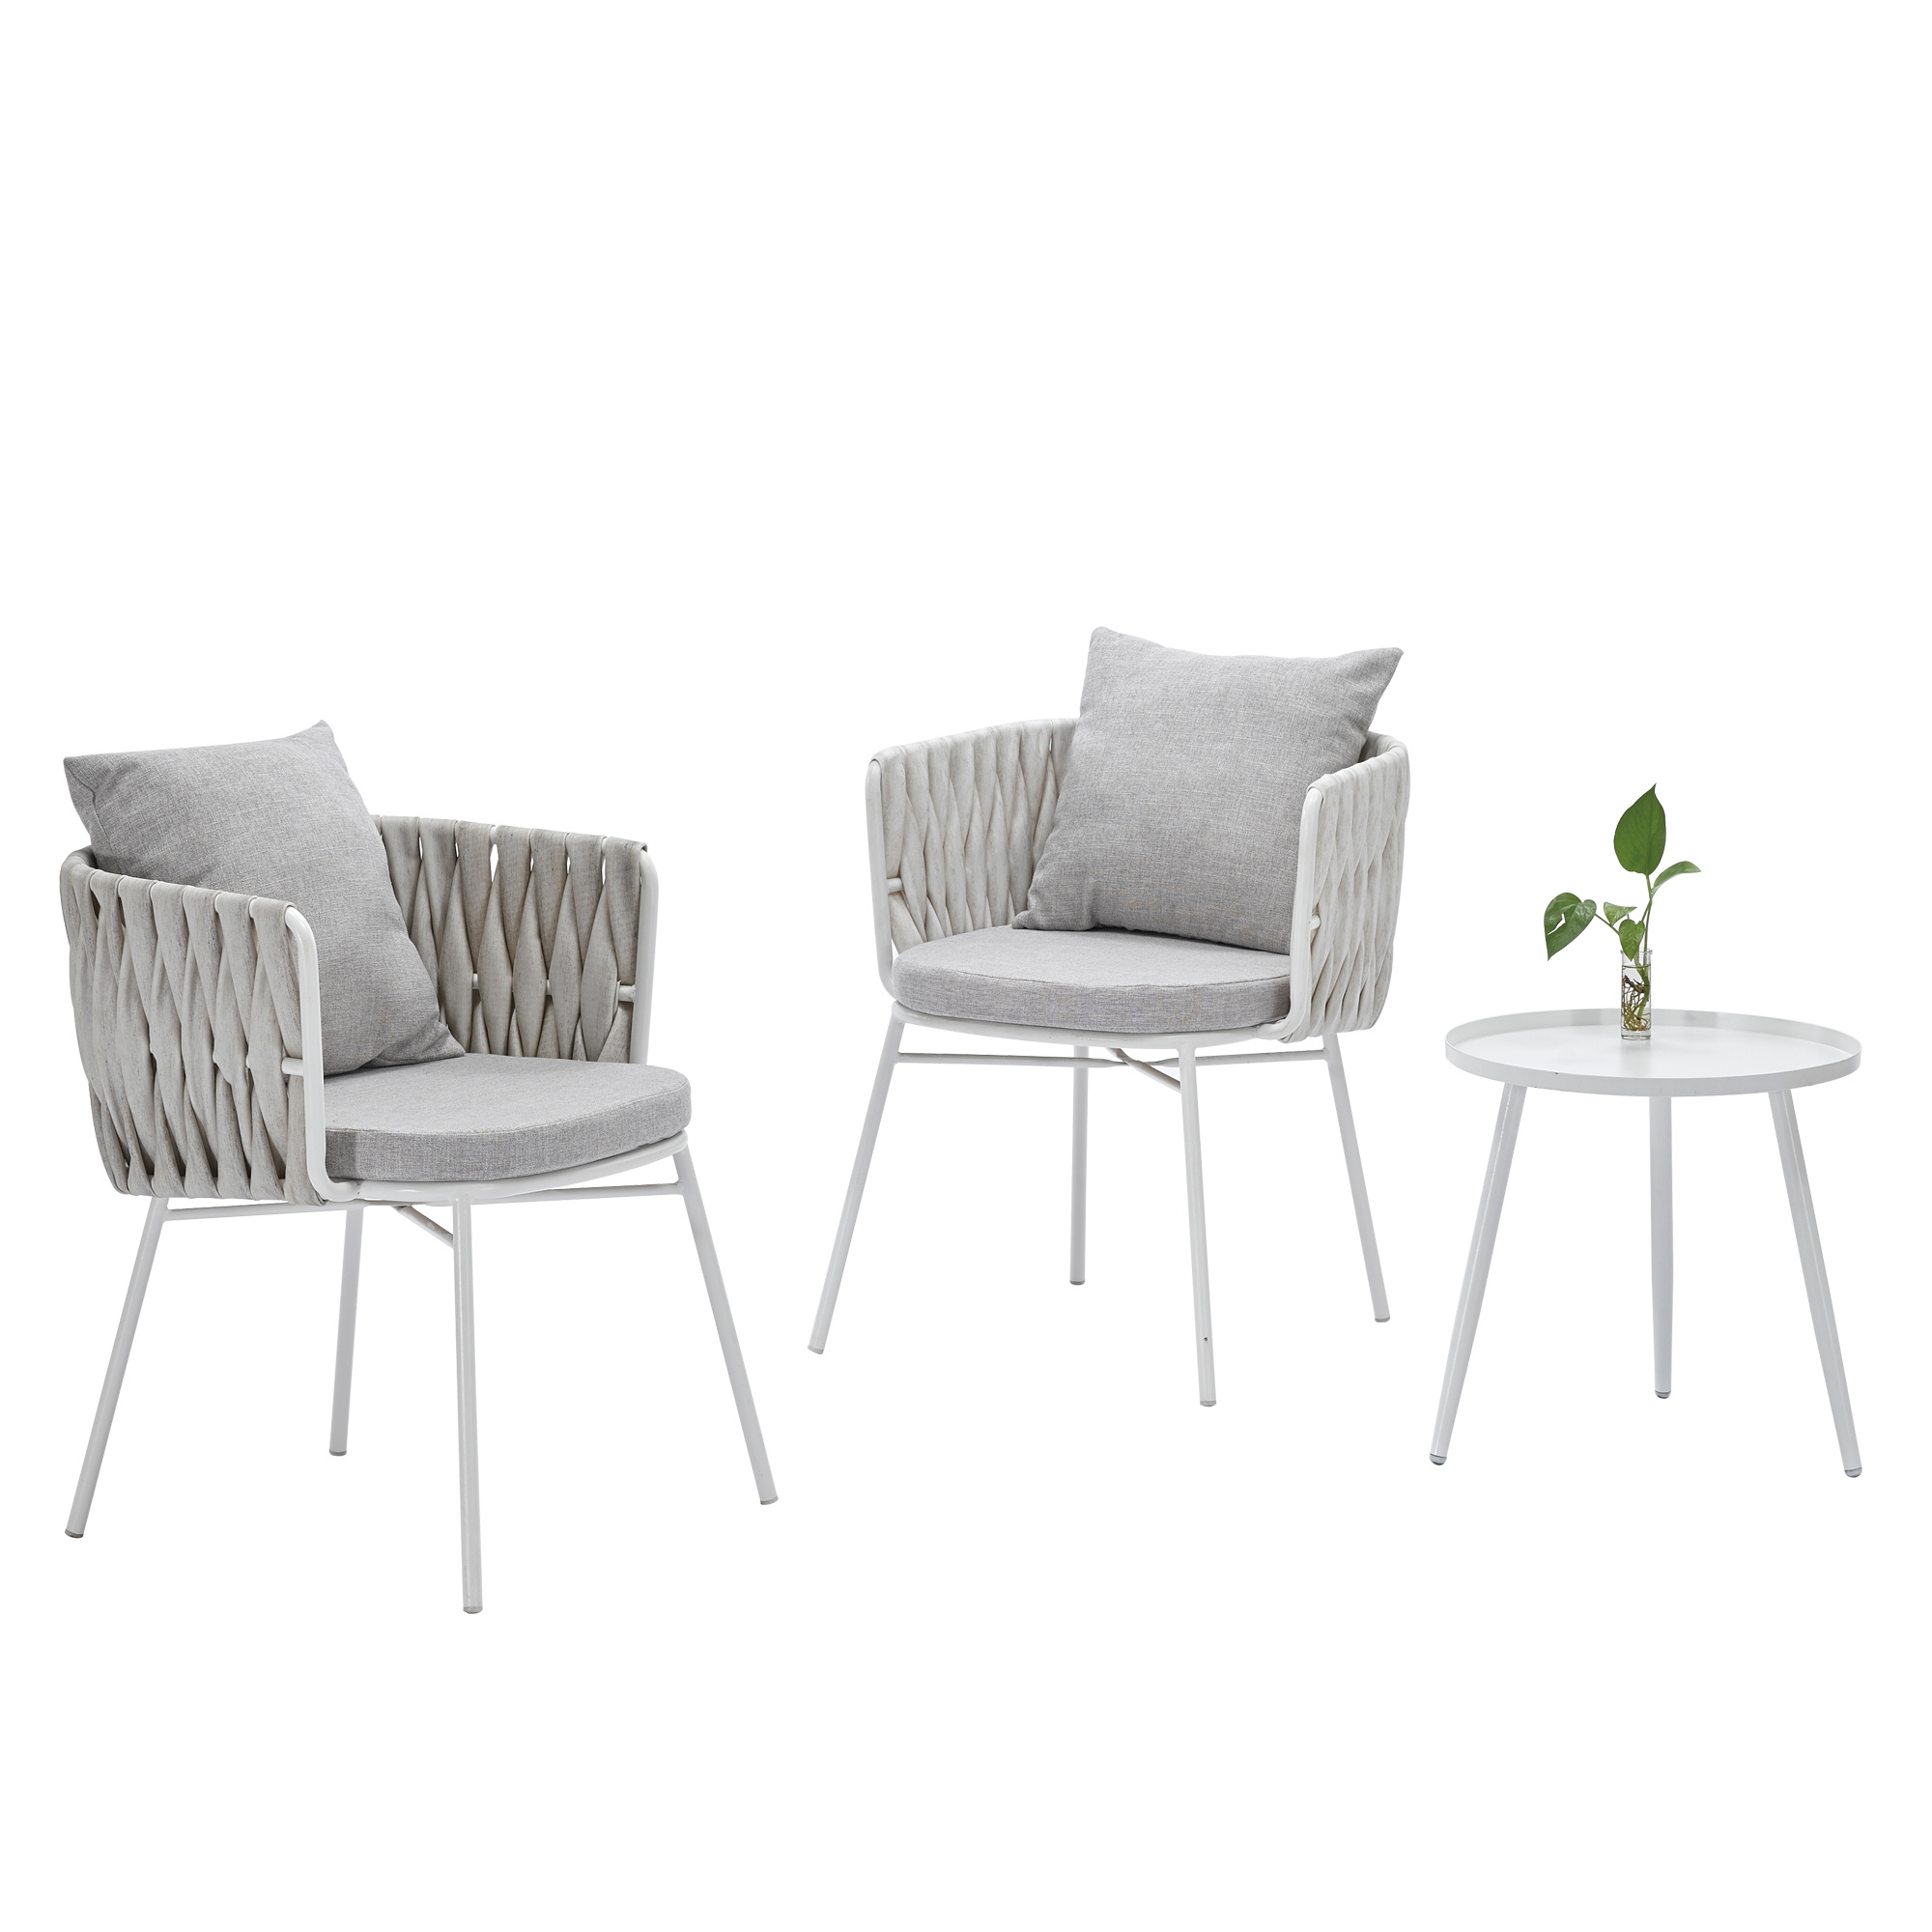 3-Pieces Patio Conversation Bistro Set, Aukfa High Quality Coffee Table Set, Indoor Patio Balcony Outdoor White Gray Coffee Chair Set, Outdoor Garden Sets Rattan Chairs Patio Furniture, Light Gray - image 4 of 8